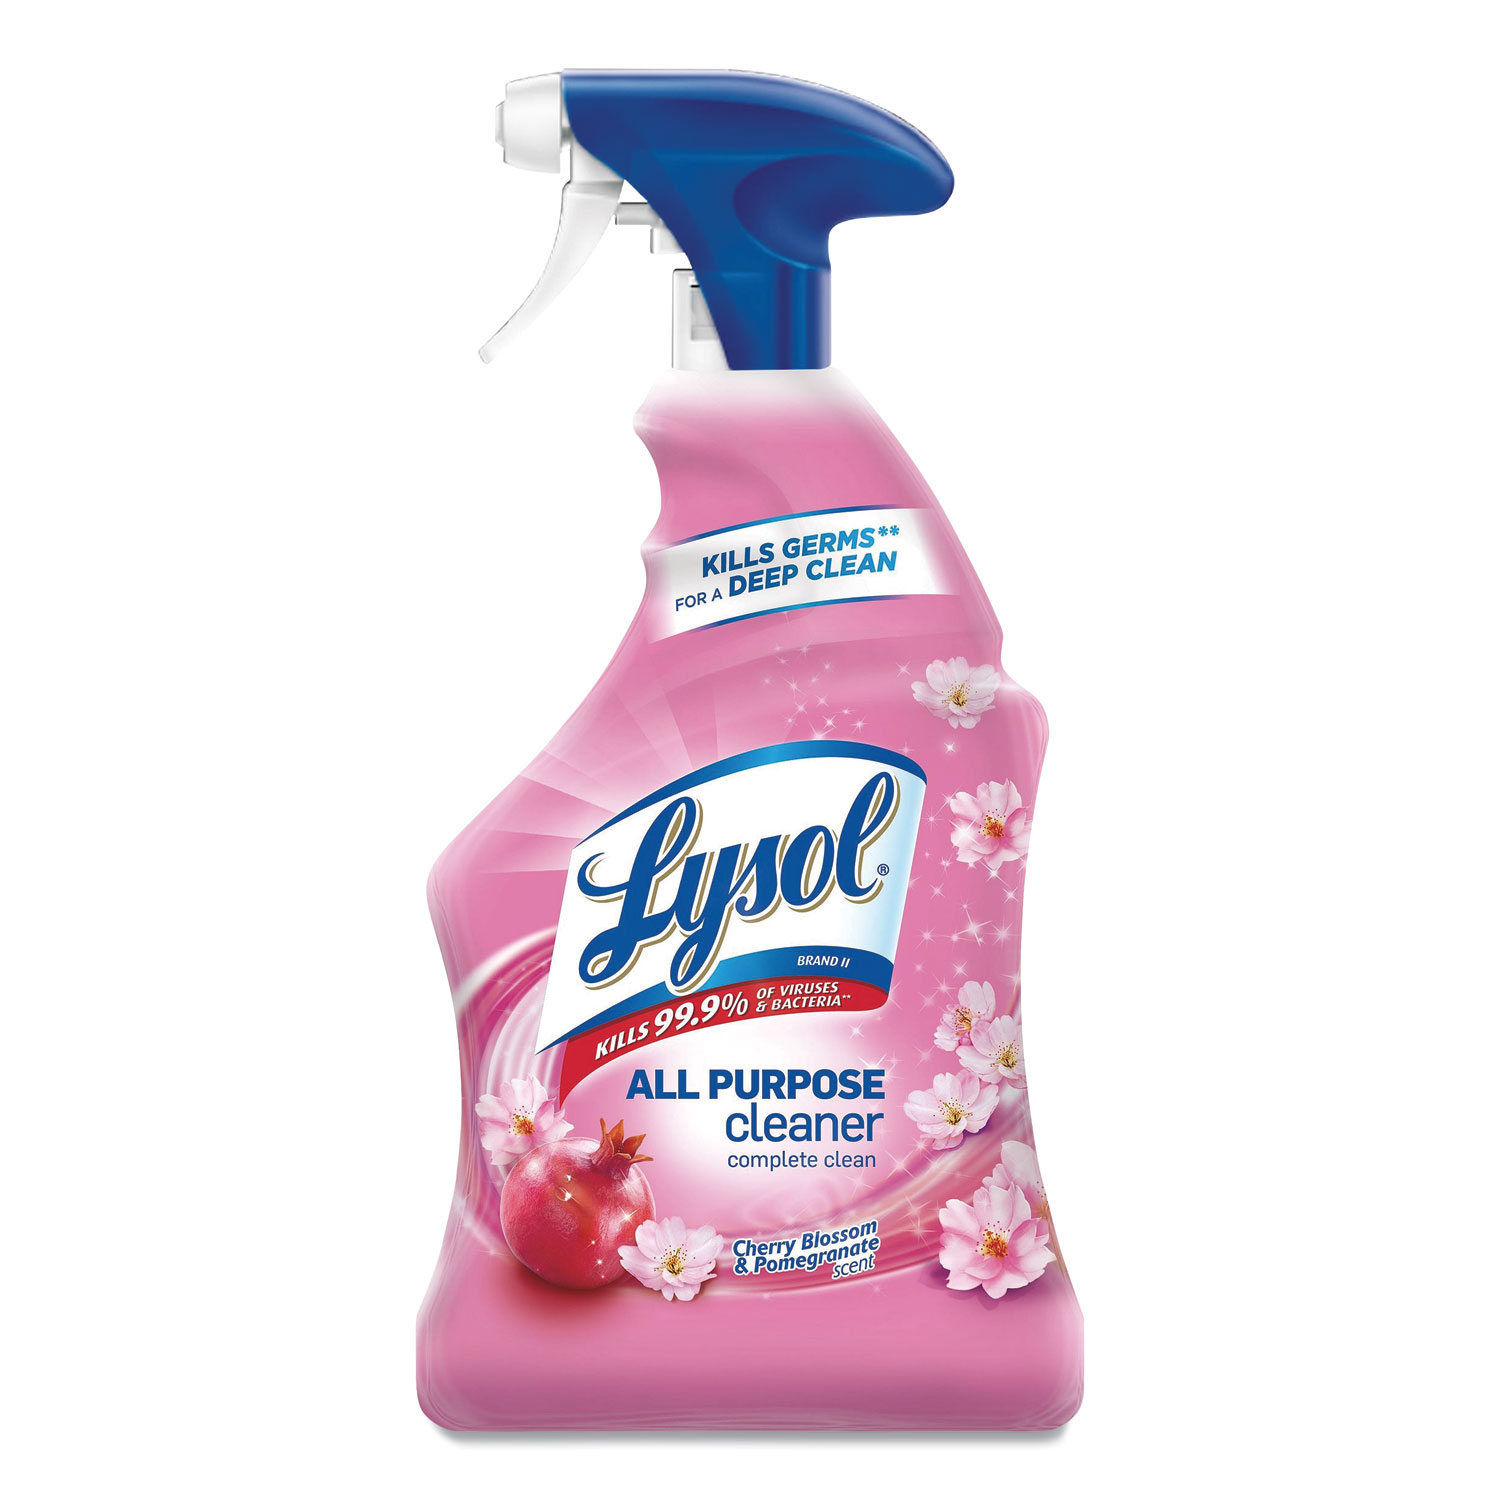  LYSOL Brand 19200-95367 Ready-to-Use All-Purpose Cleaner, Cherry Blossom and Pomegranate, 22 oz, Trigger Spray Bottle, 6/Carton (RAC95367CT) 